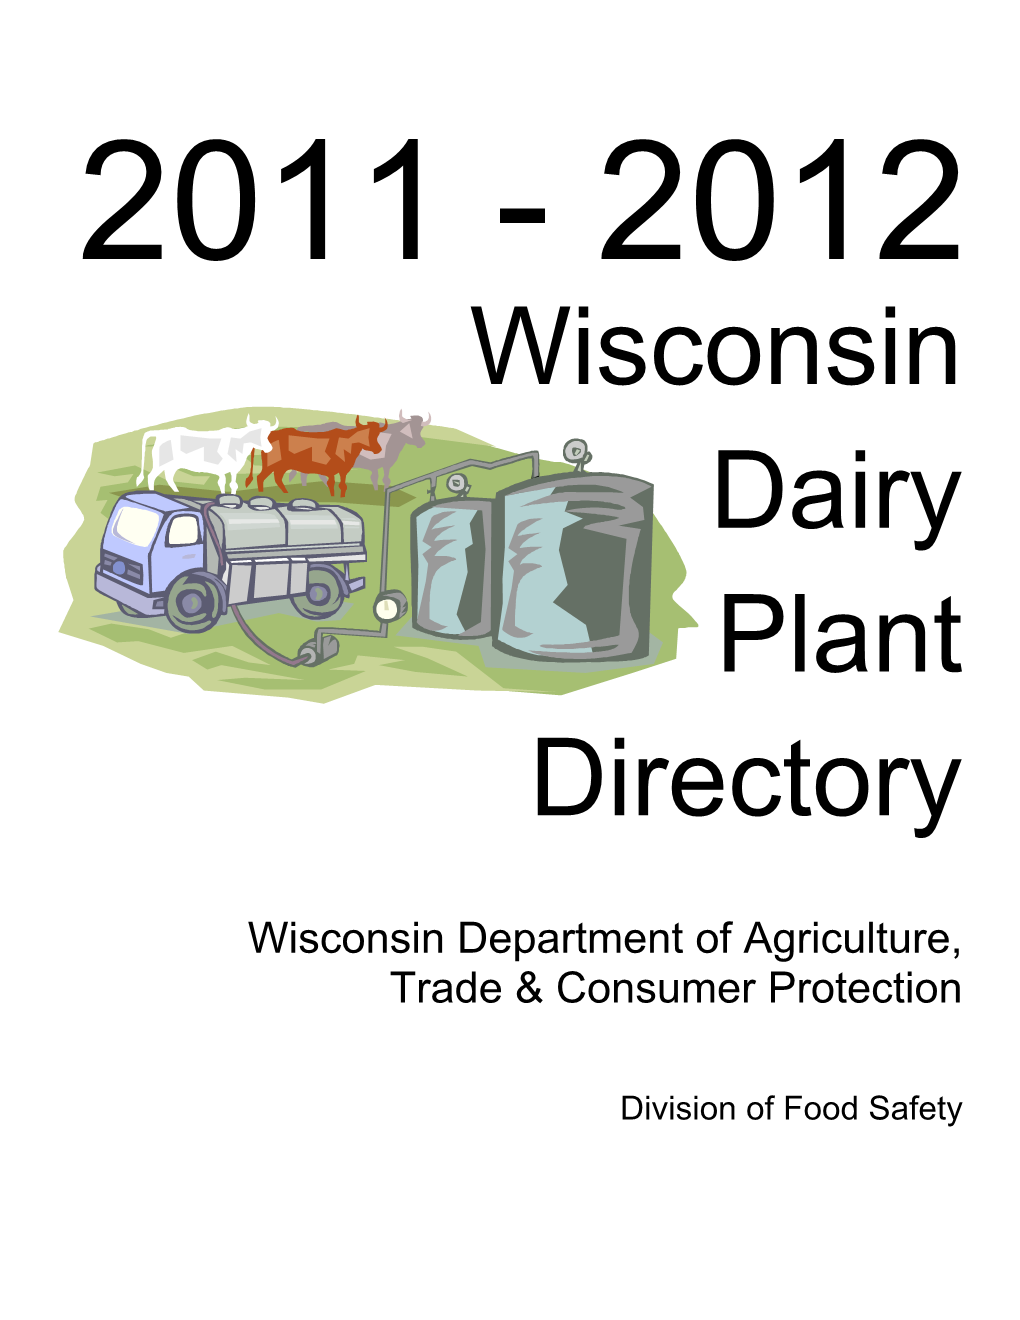 Wisconsin Dairy Plant Directory